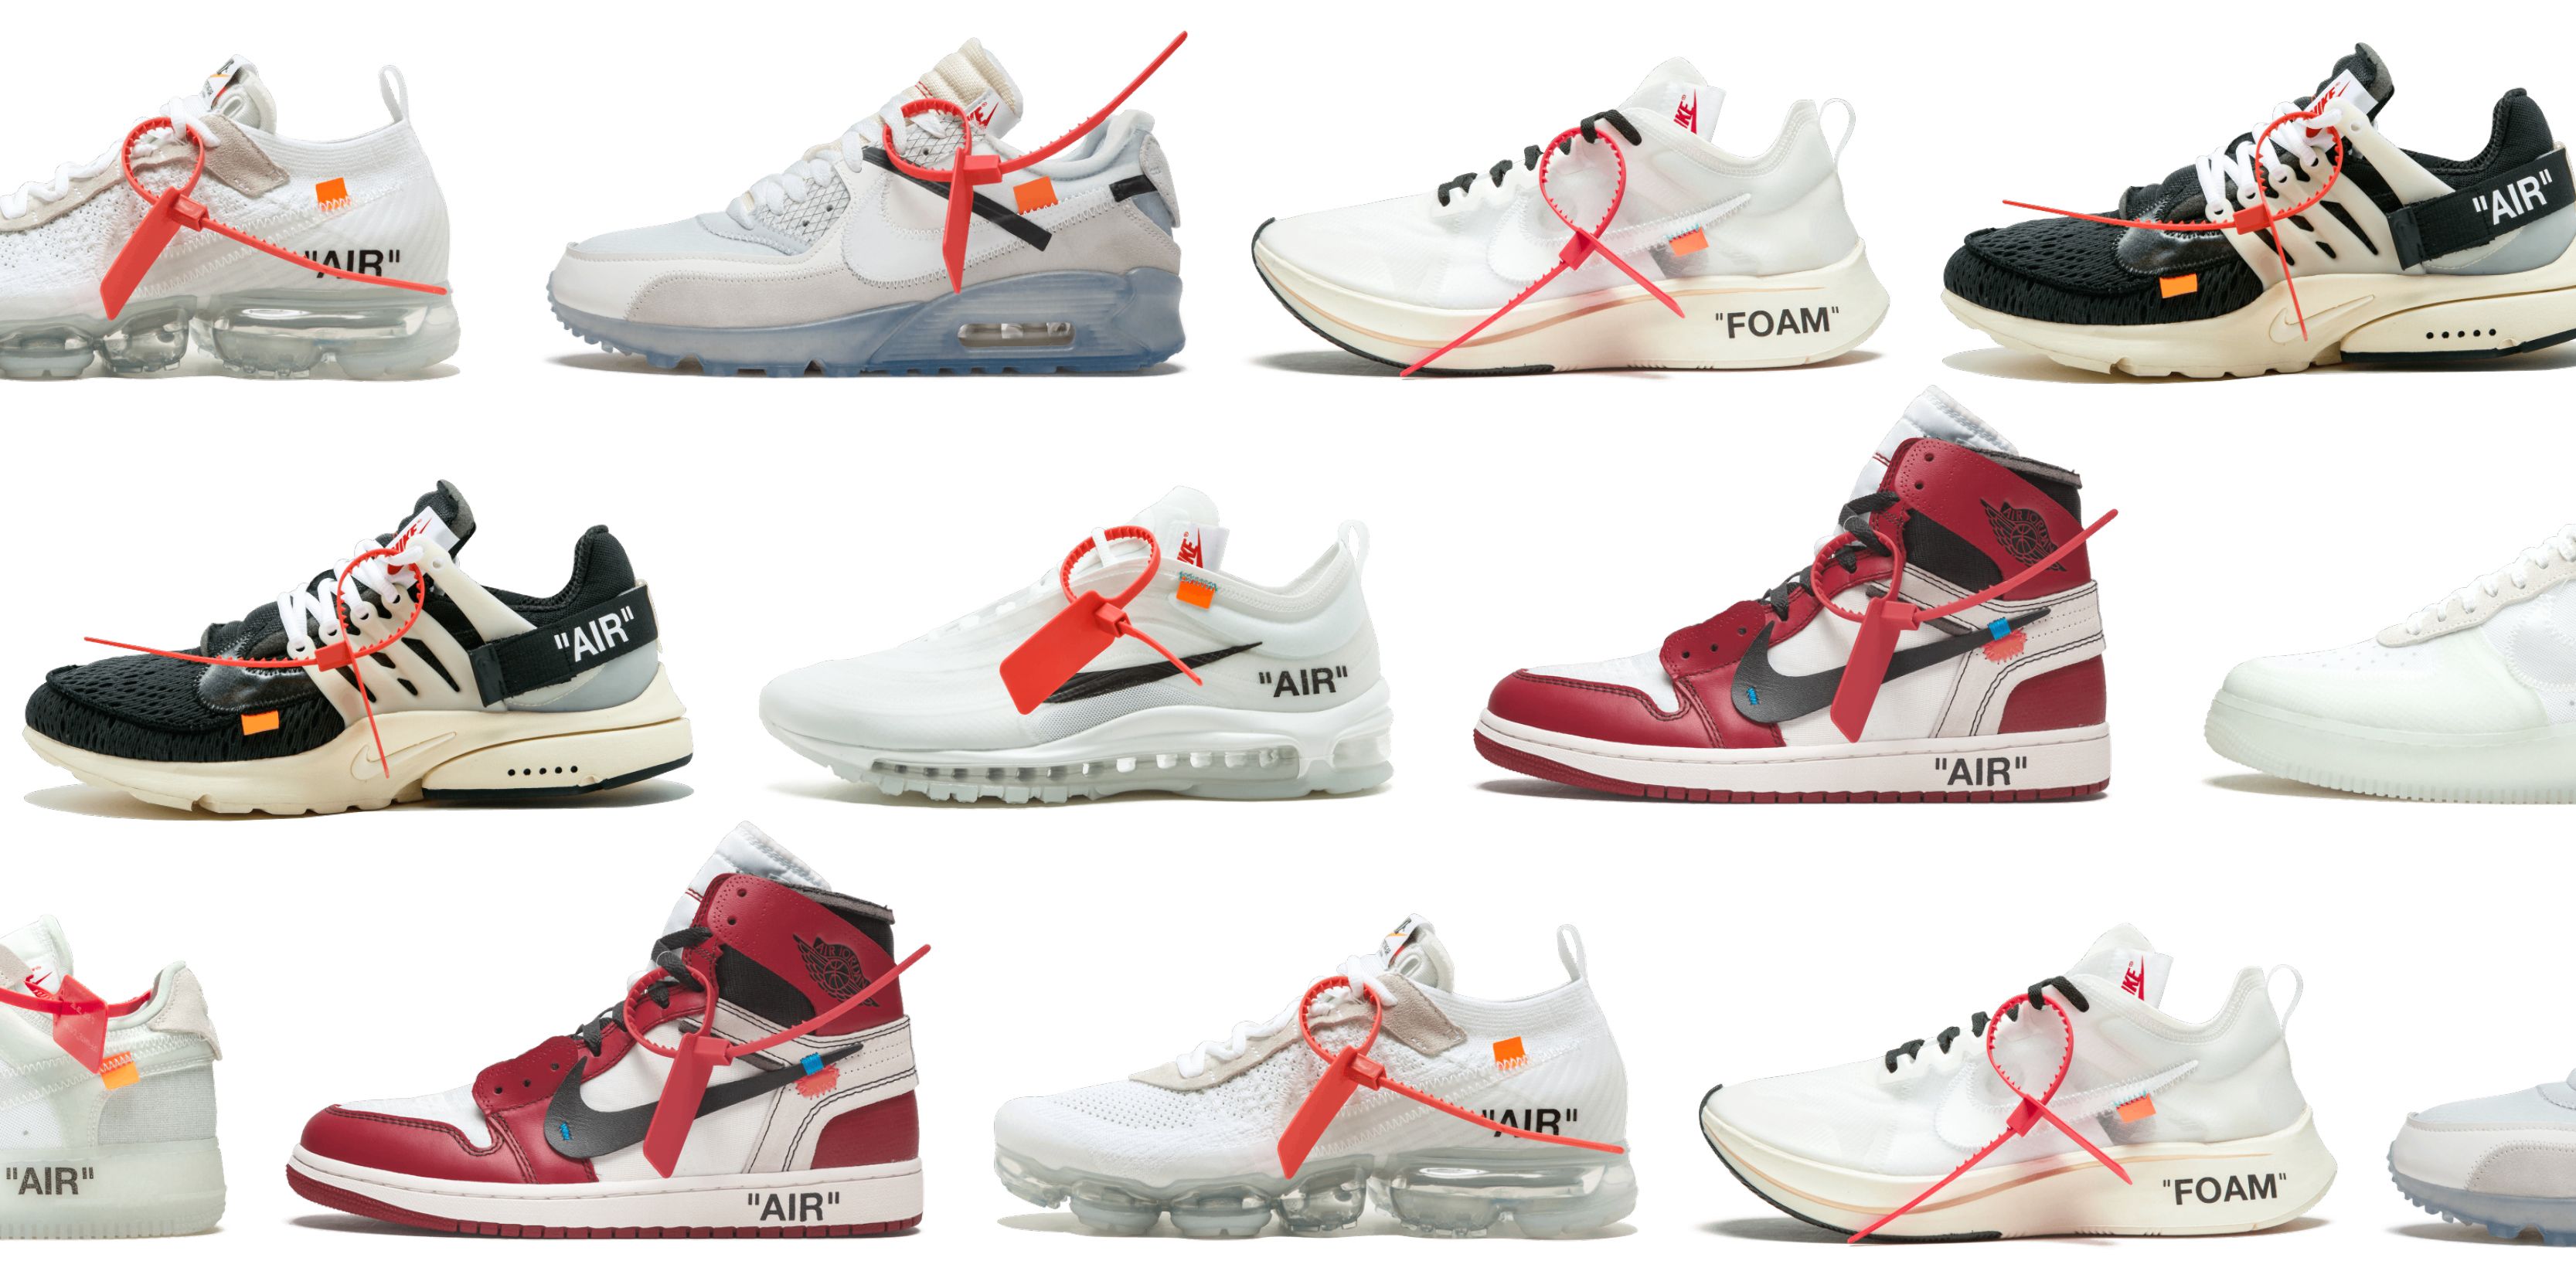 Best Nike Off-White Shoes | Nike Off-White Releases 2019